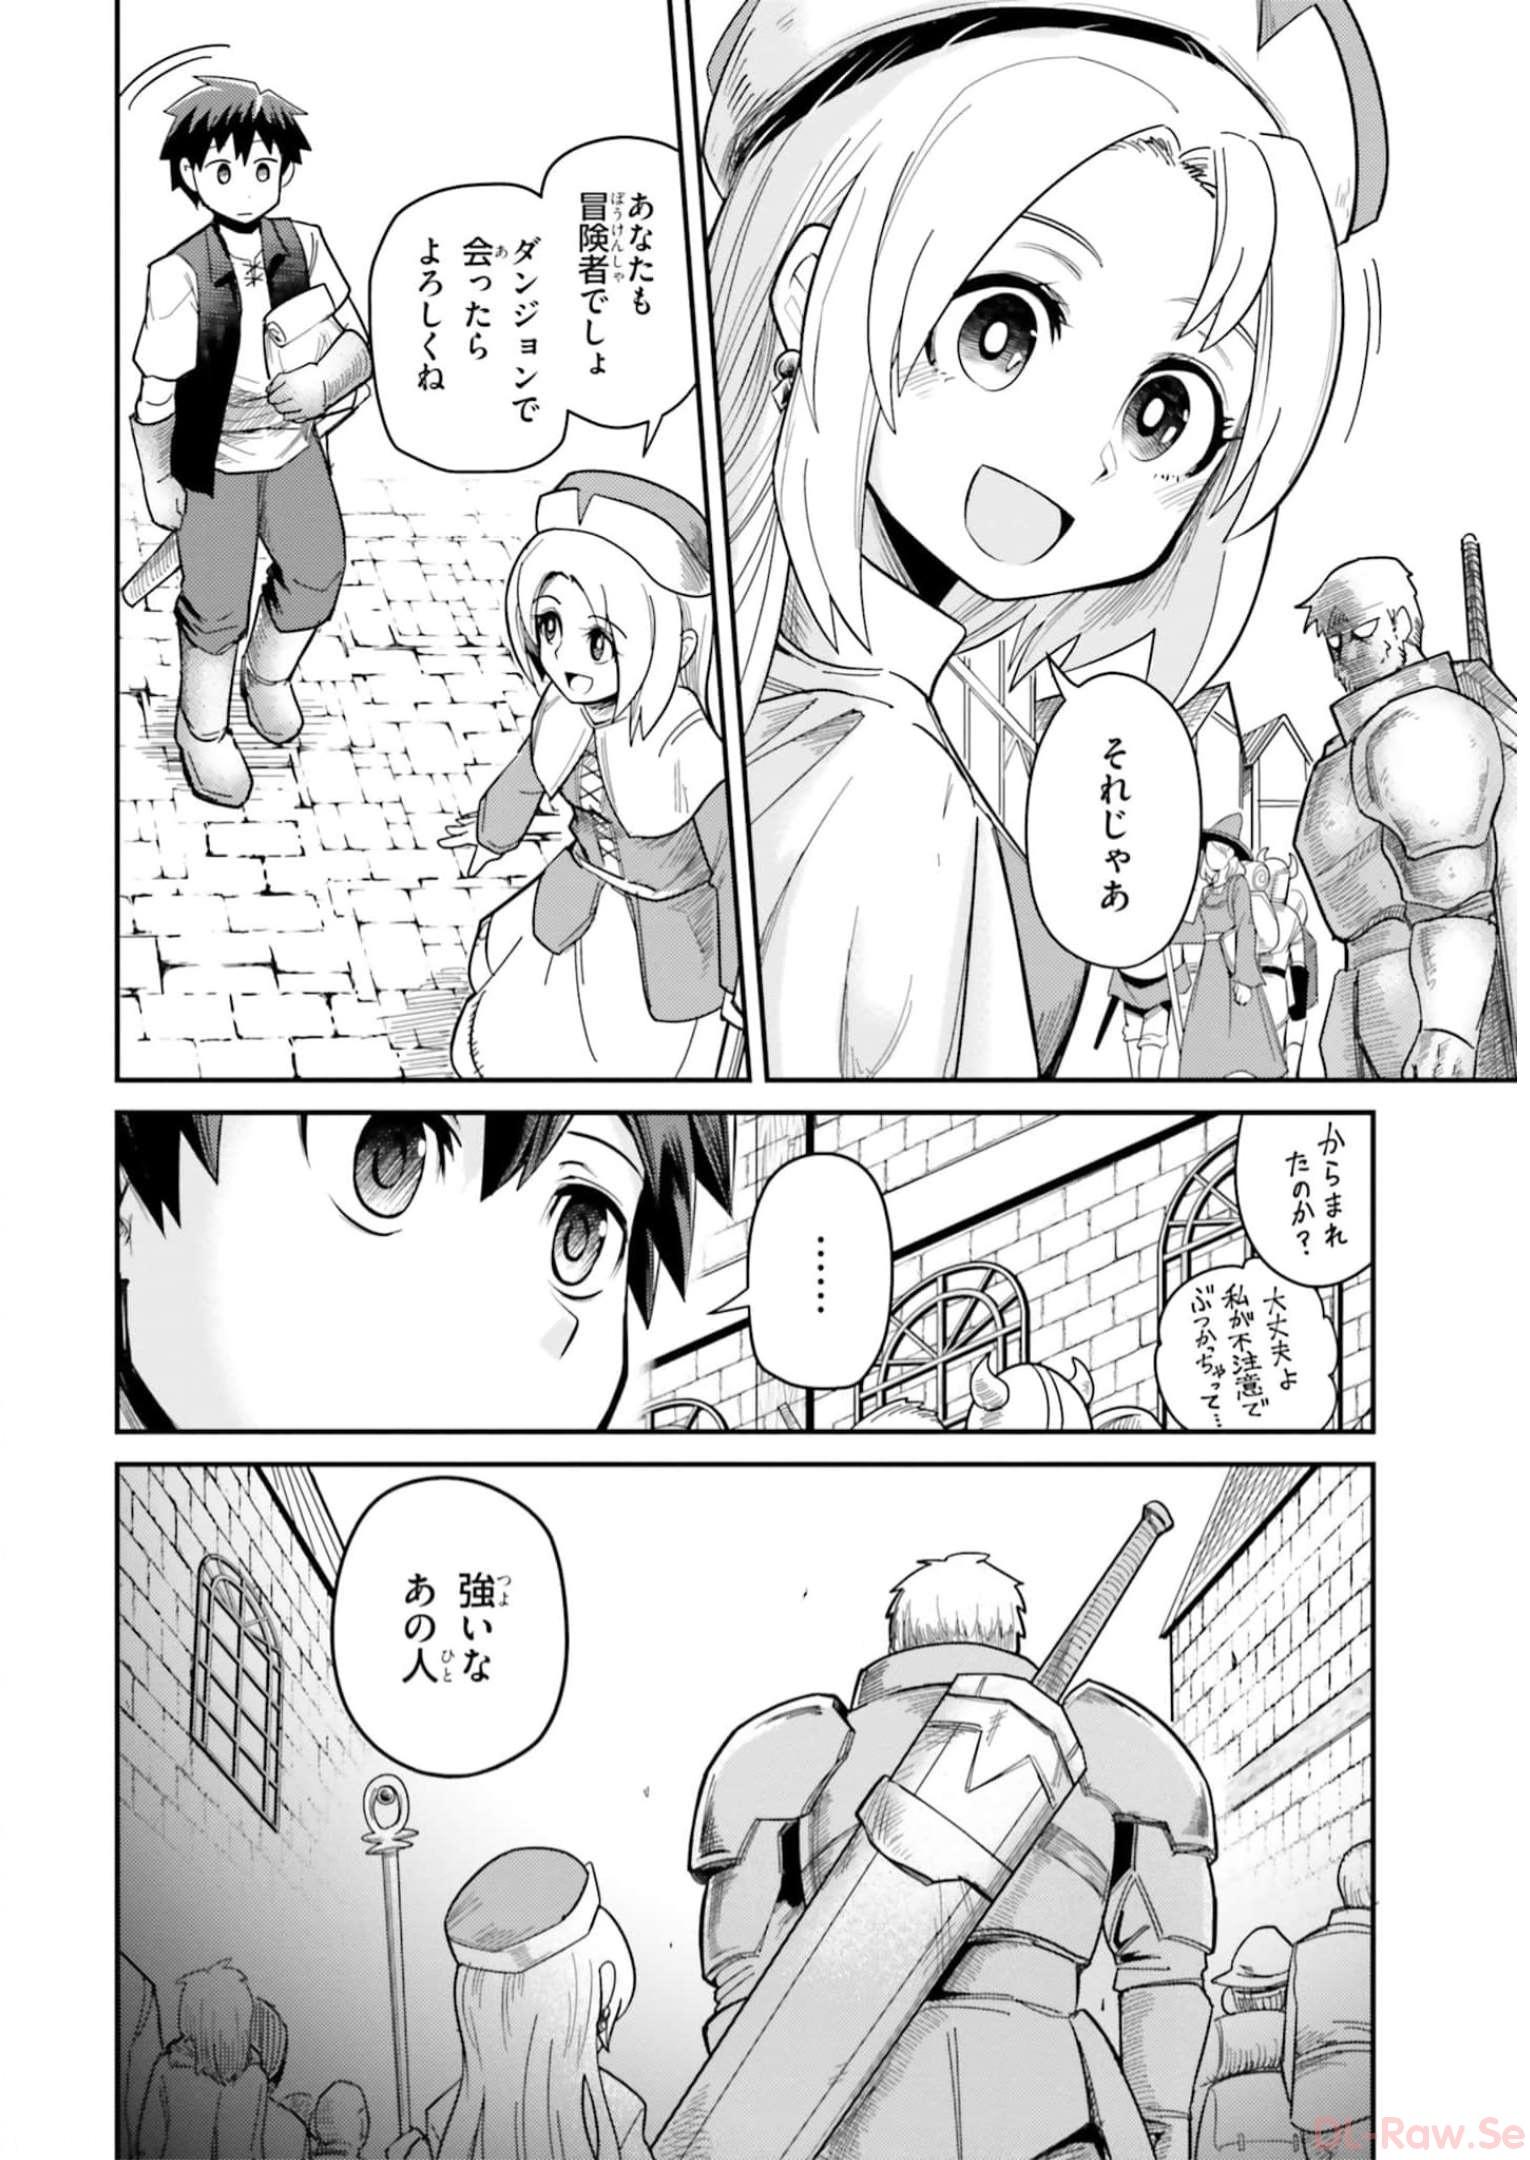 Dungeon Friends Forever Dungeon’s Childhood Friend ダンジョンの幼なじみ 第7話 - Page 2